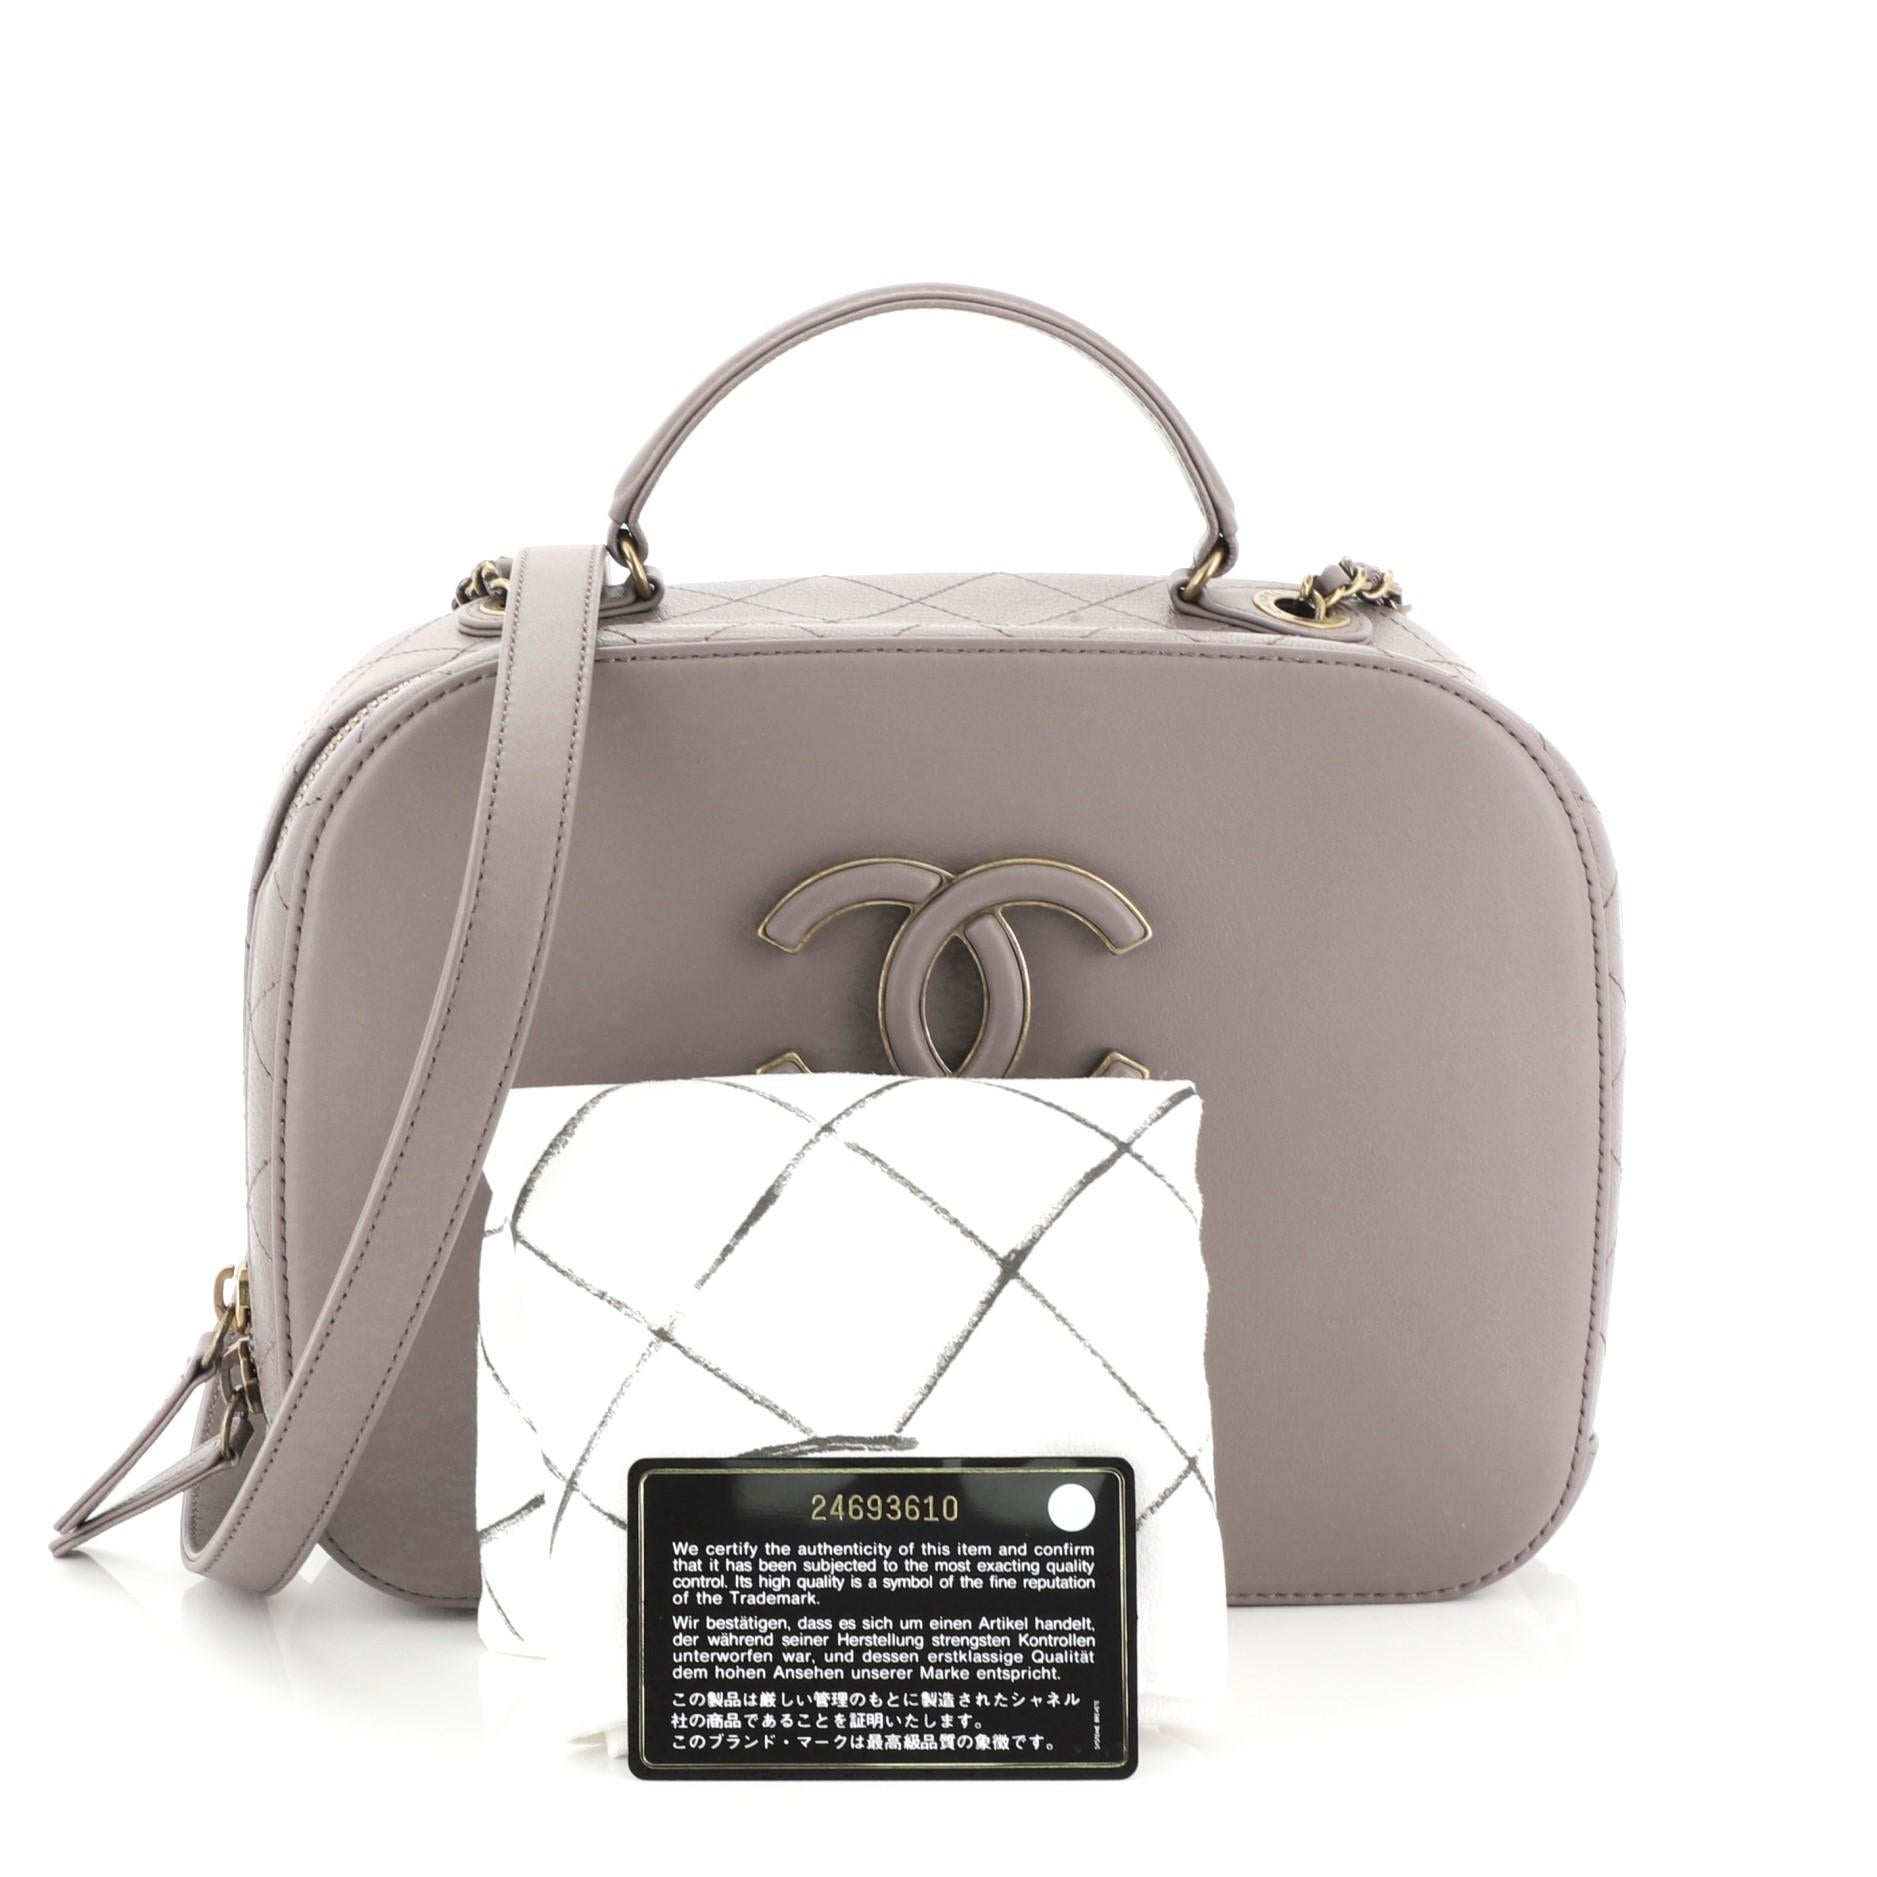 This Chanel Coco Curve Vanity Case Calfskin and Quilted Goatskin Medium, crafted in purple calfskin and quilted goatskin, features a leather top handle, woven-in leather chain strap with leather pad, CC logo at front, exterior back zip pocket, and